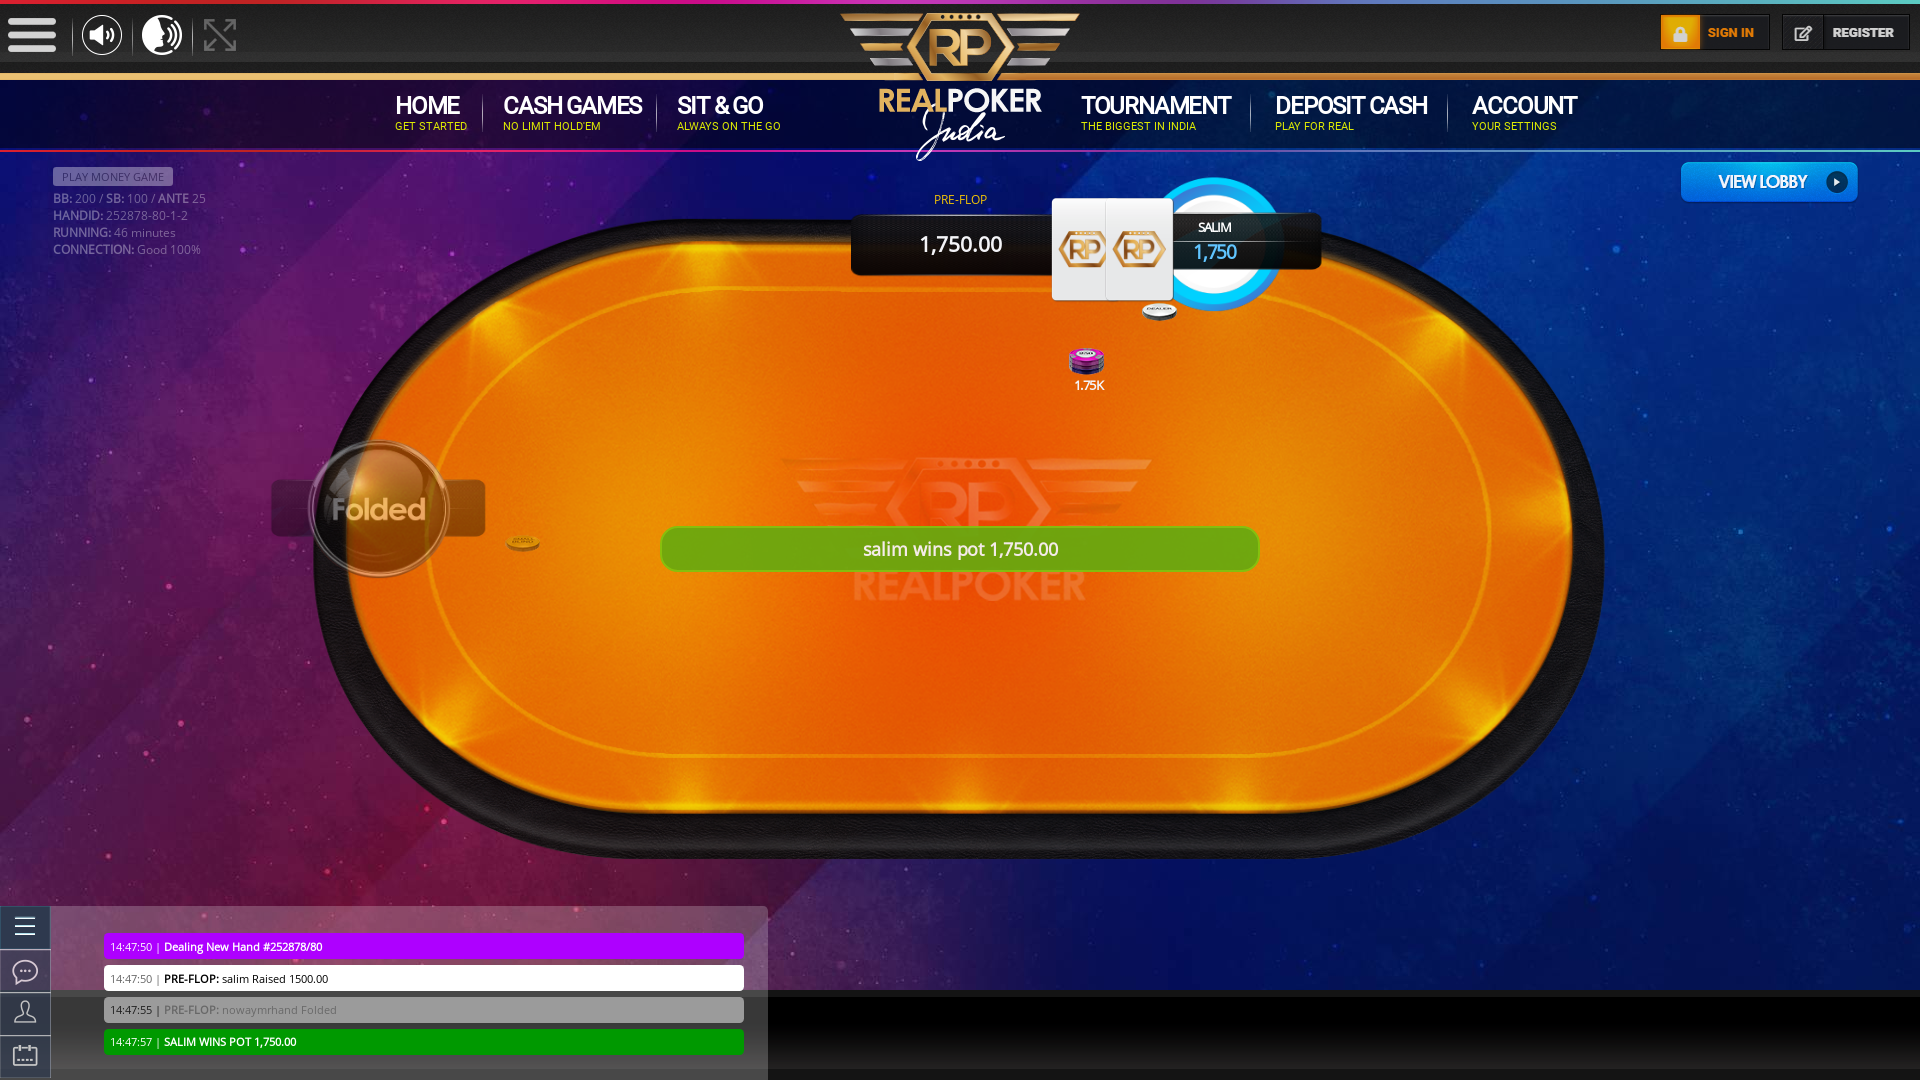 Indian online poker on a 10 player table in the 45th minute match up